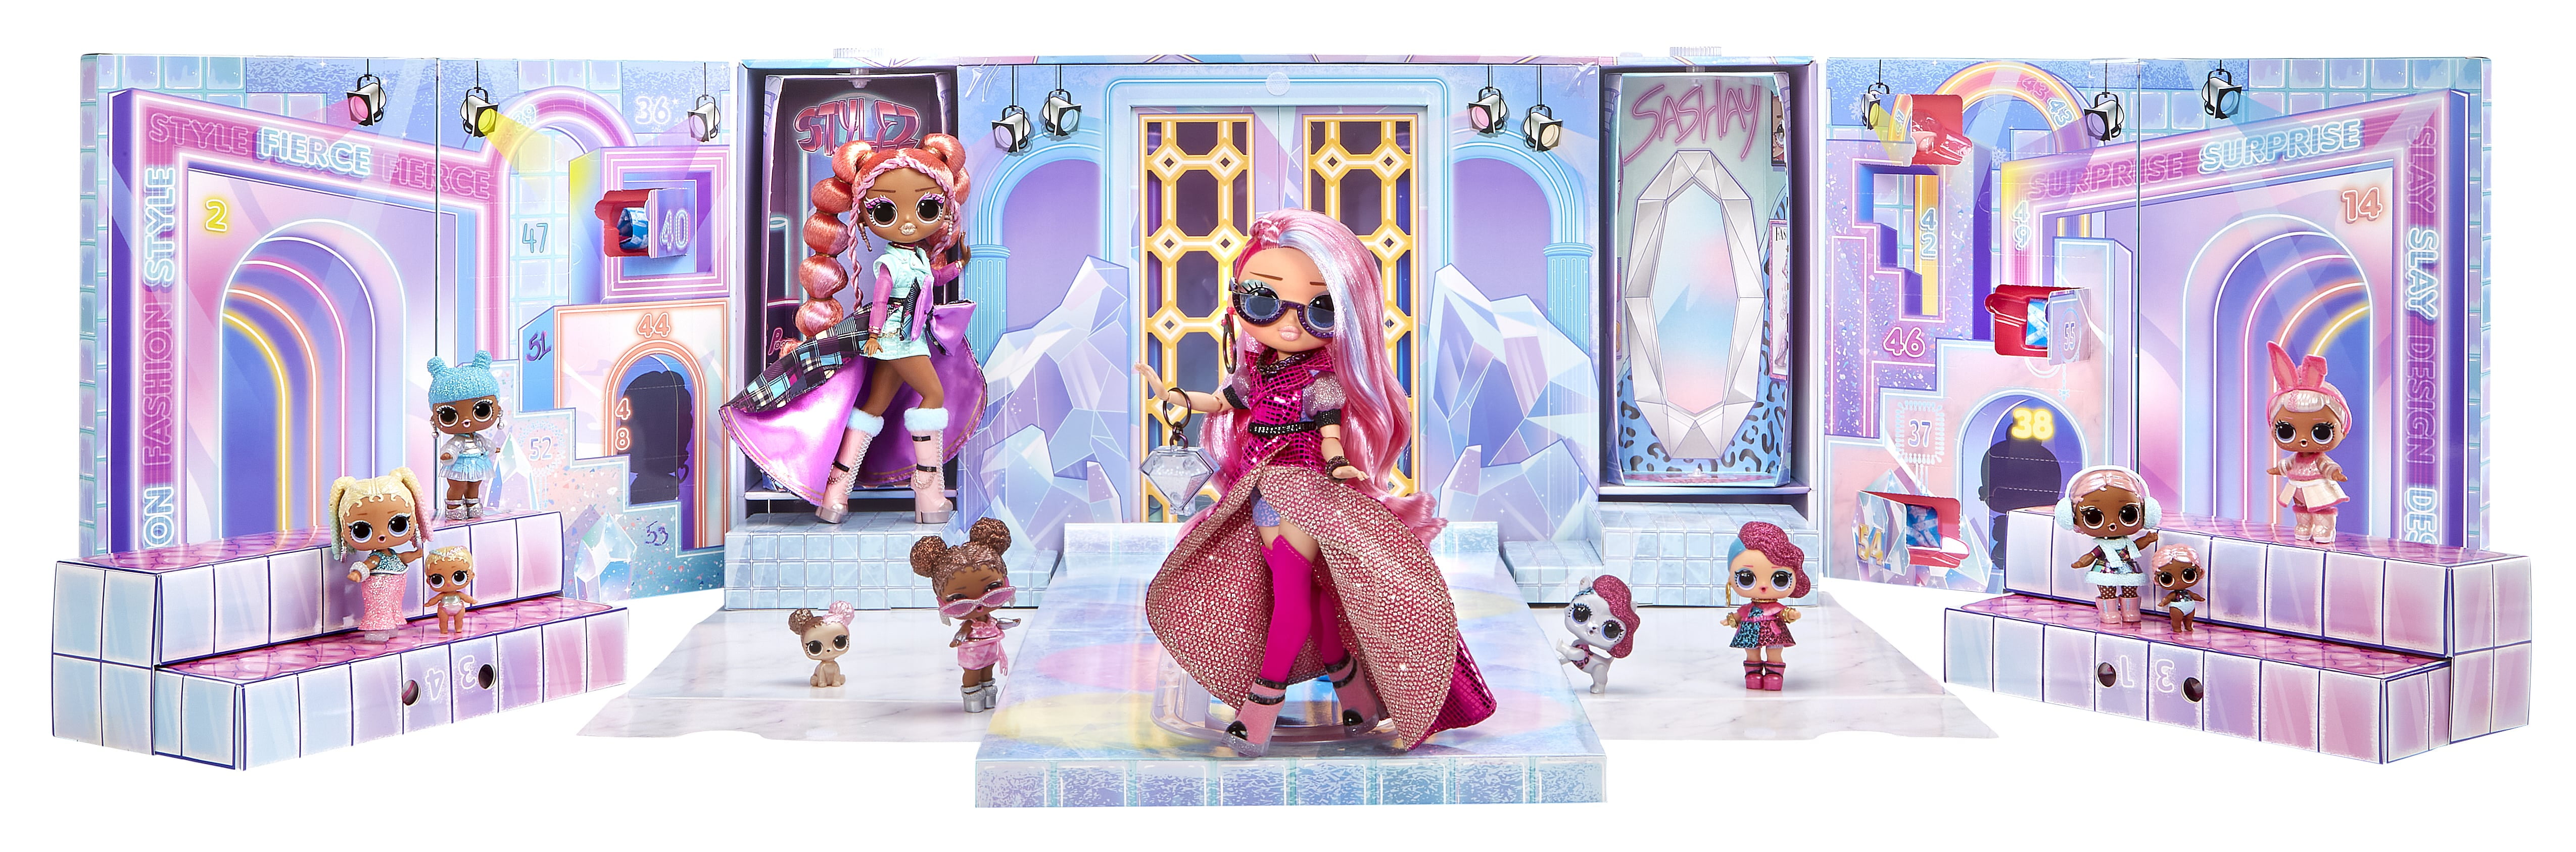 LOL Surprise Fashion Show Mega Runway- Runway Playset with 80 Surprises, 1500+ Mix & Match Looks, Fashion Dolls, Collectible Dolls, Runway Set, Fashion Toy Girls Ages 4 and Up